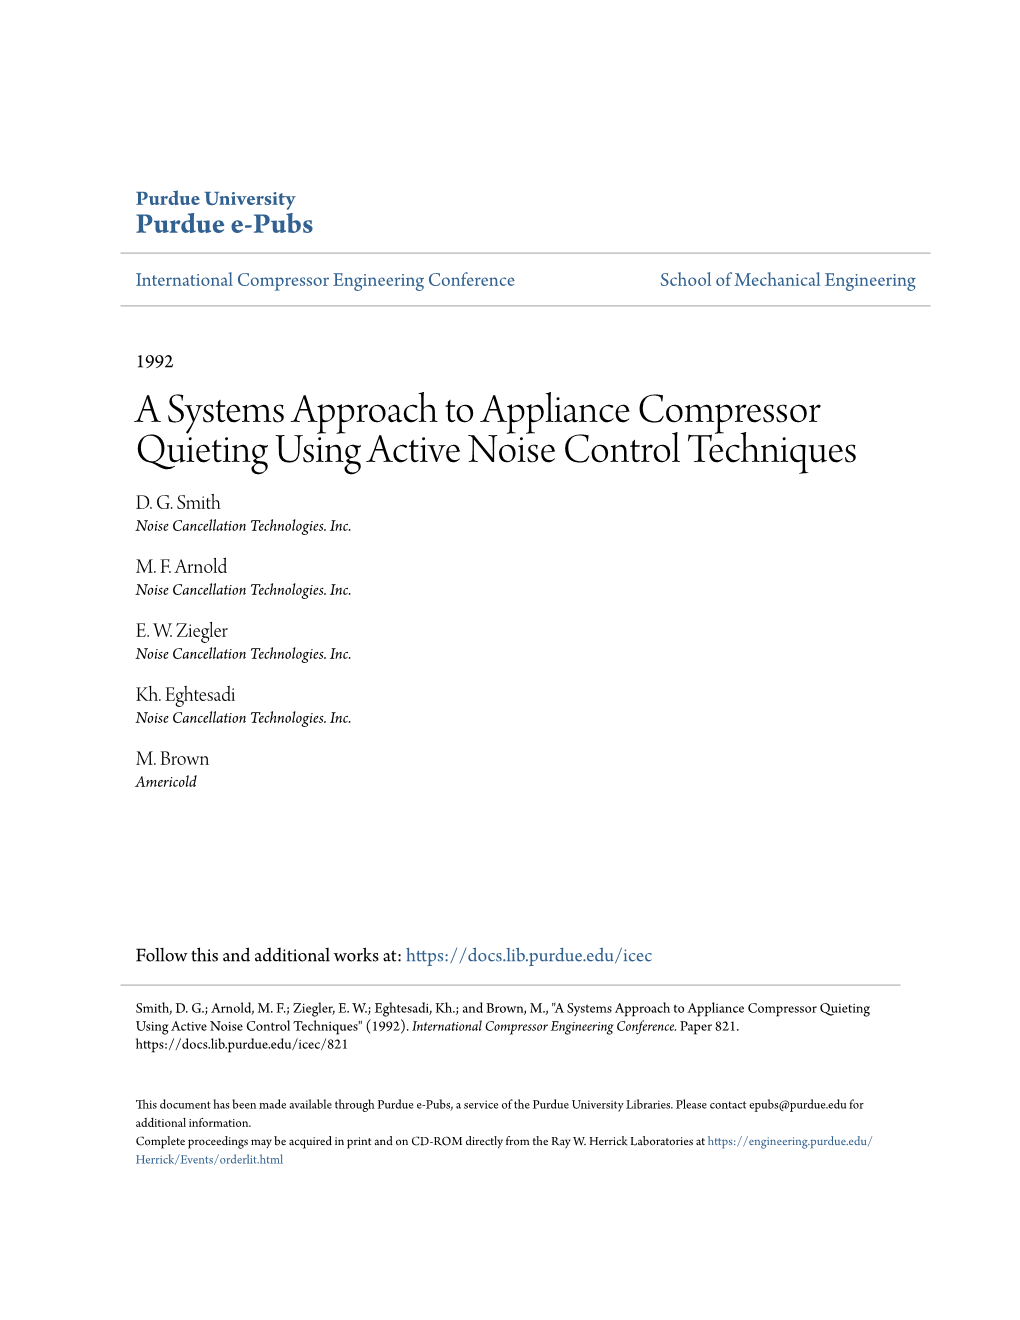 A Systems Approach to Appliance Compressor Quieting Using Active Noise Control Techniques D